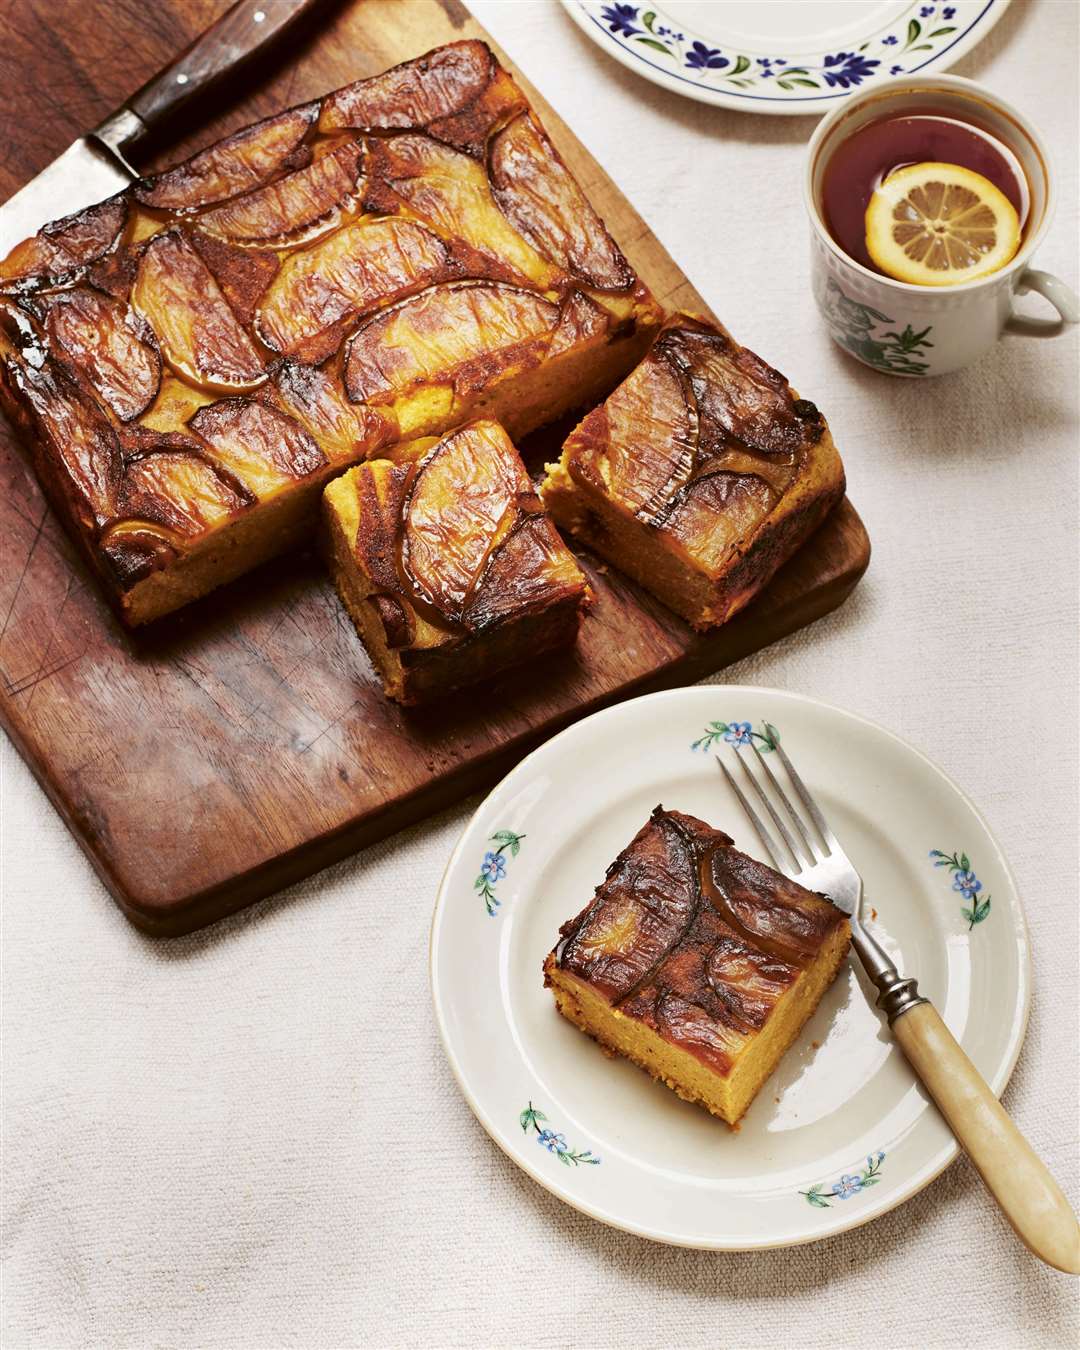 Curd cake with caramelised apples from Summer Kitchens. Picture: Joe Woodhouse/PA